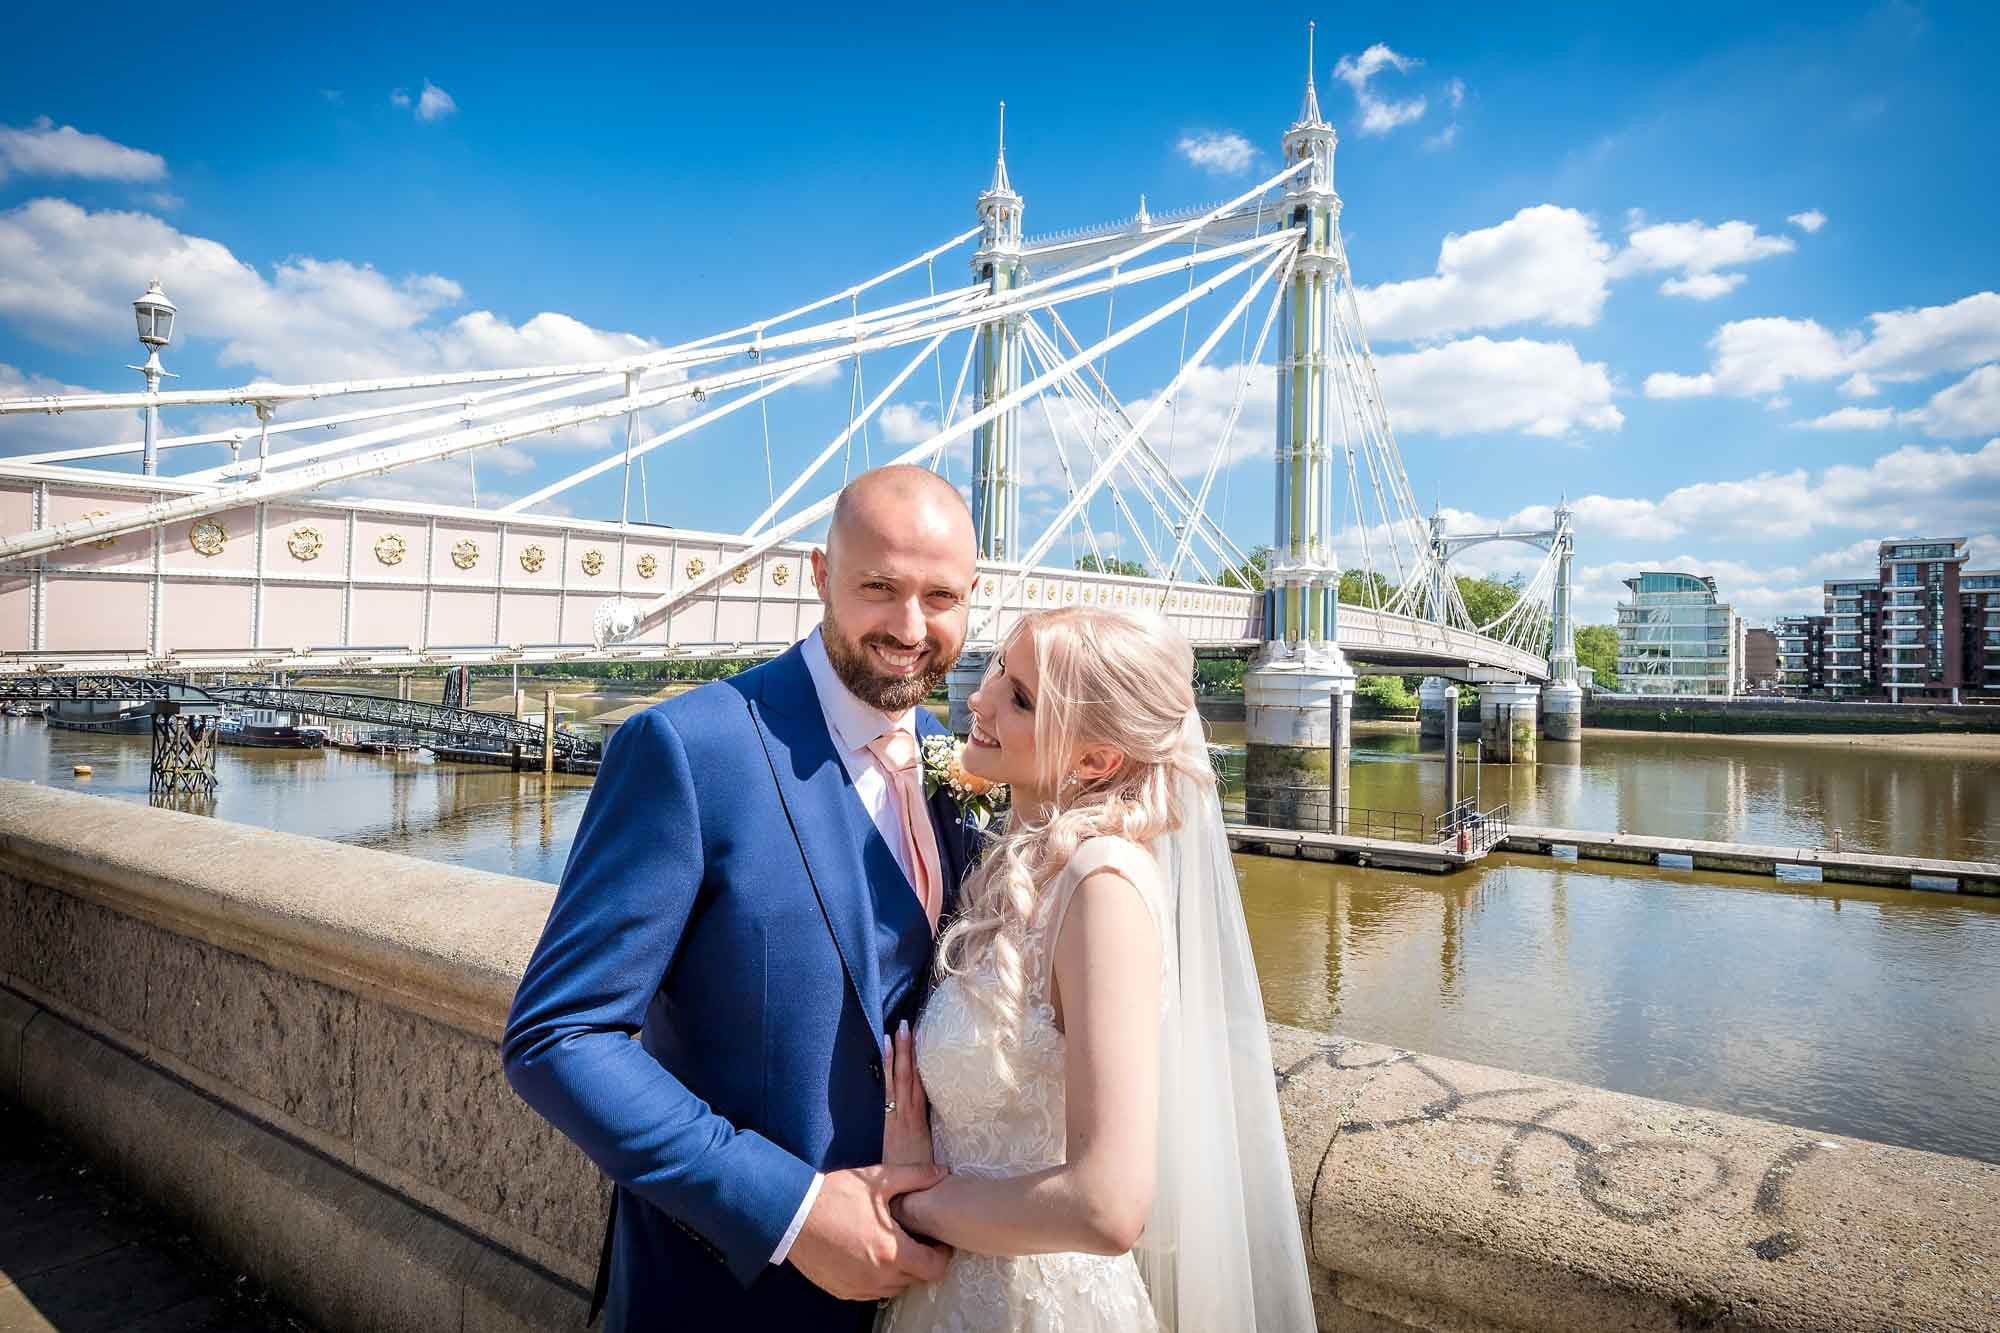 A bride looks at her groom with the Albert Bridge in London in the background